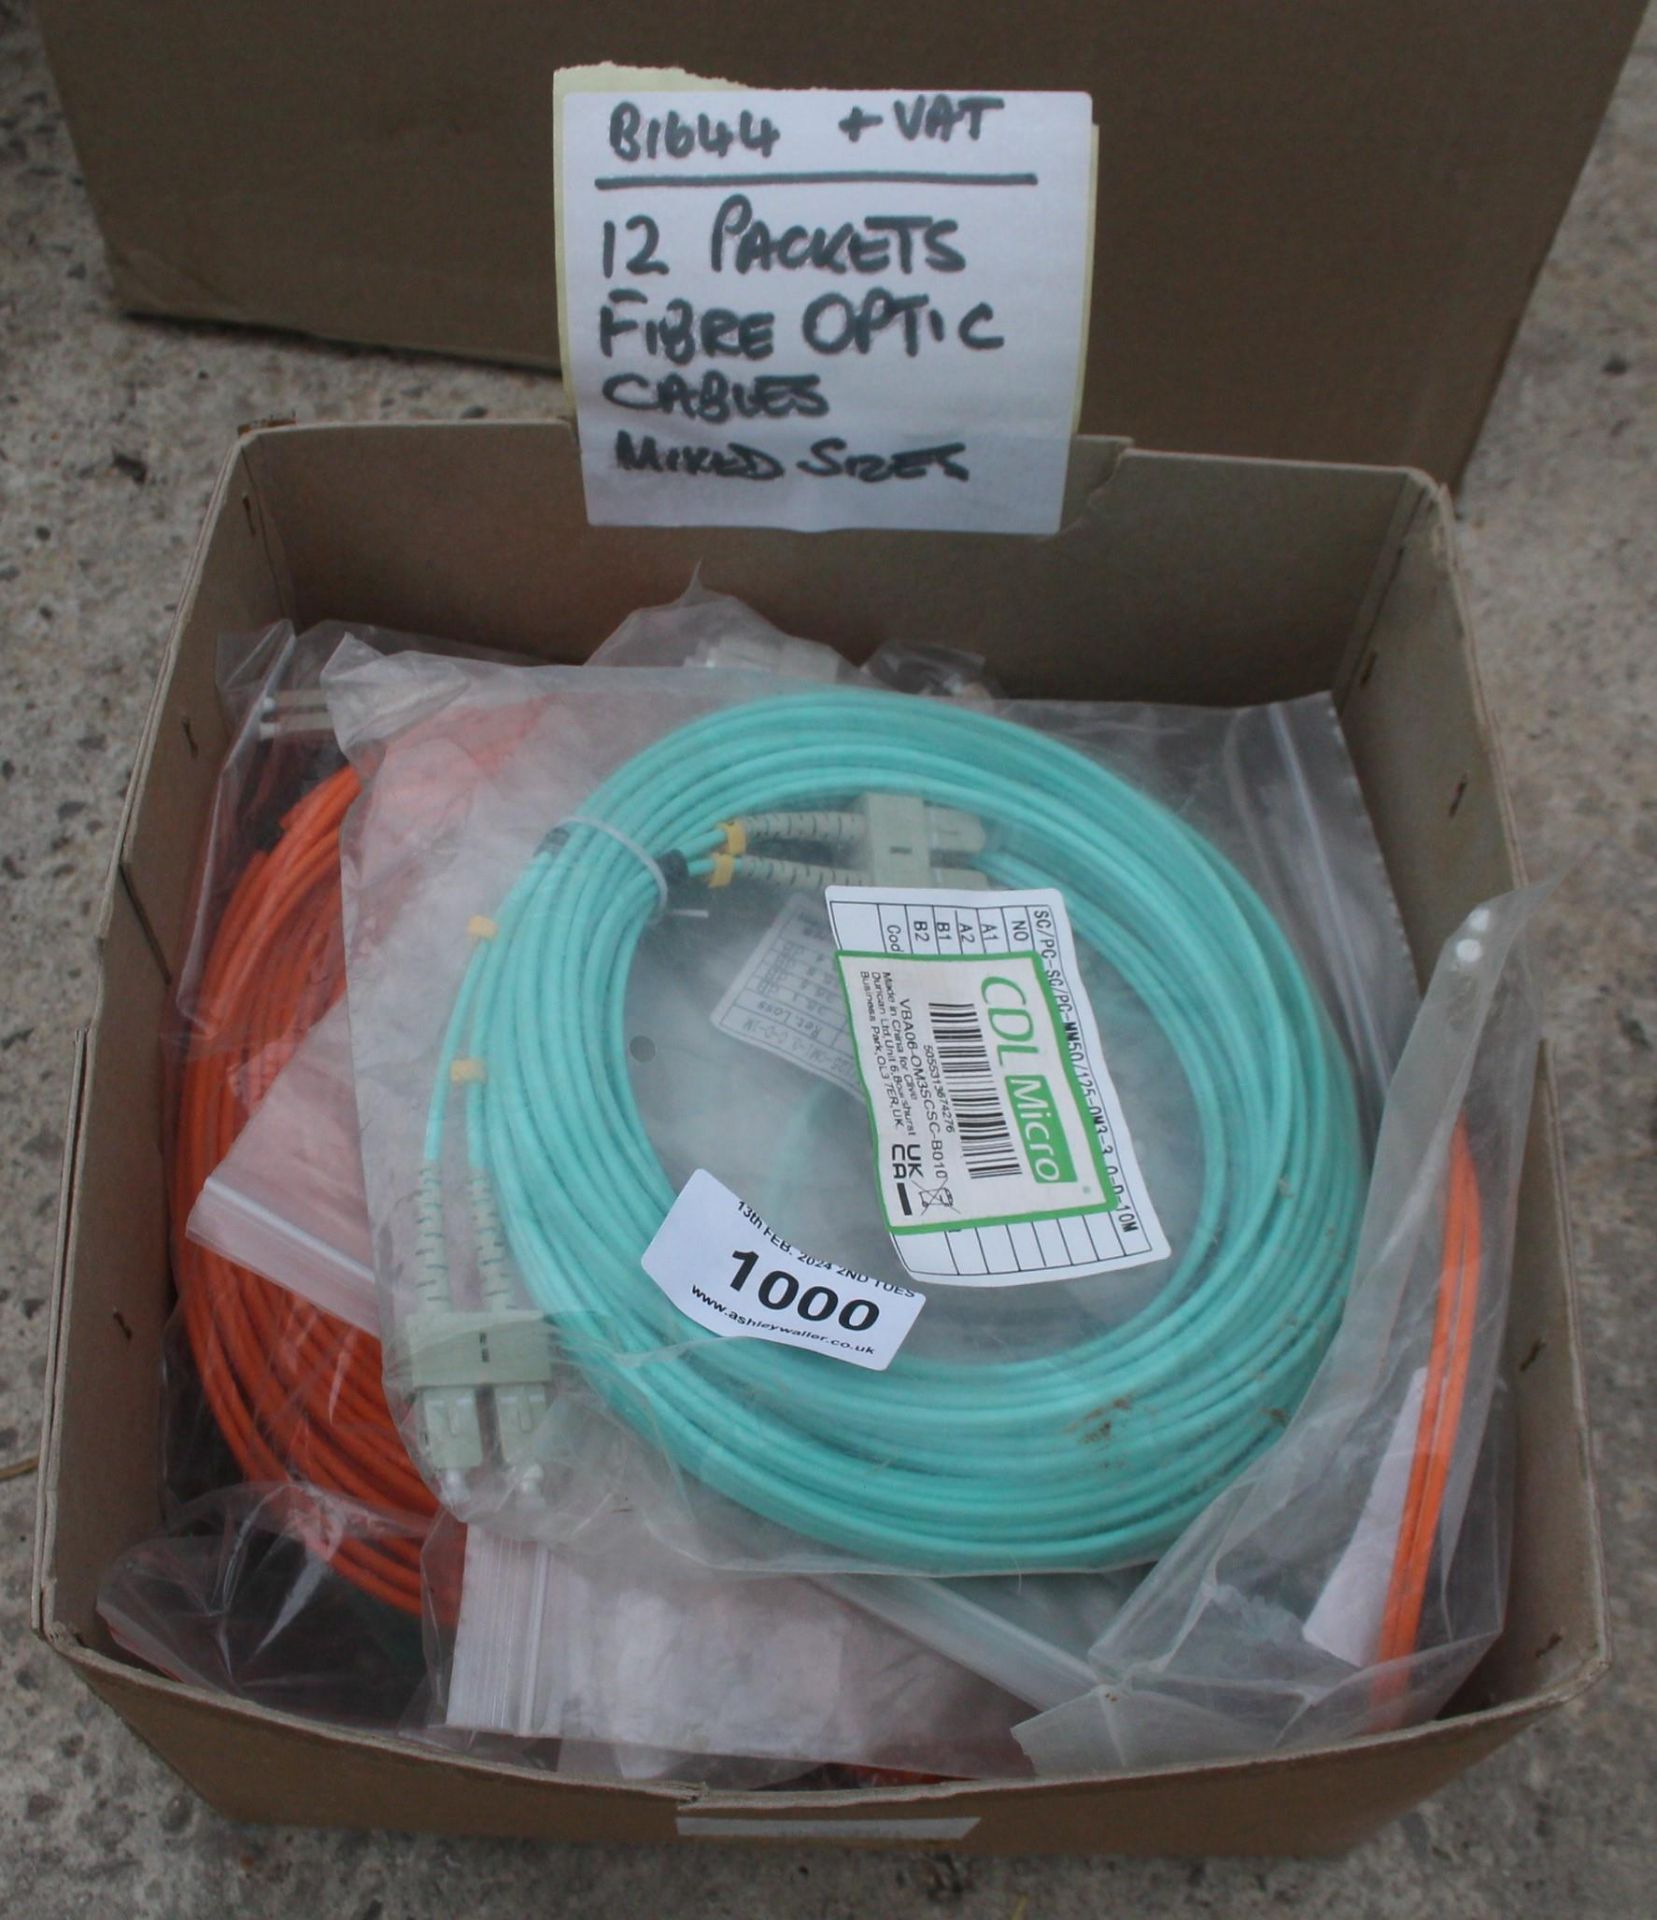 12 PACKETS OF FIBRE OPTIC CABLE + VAT